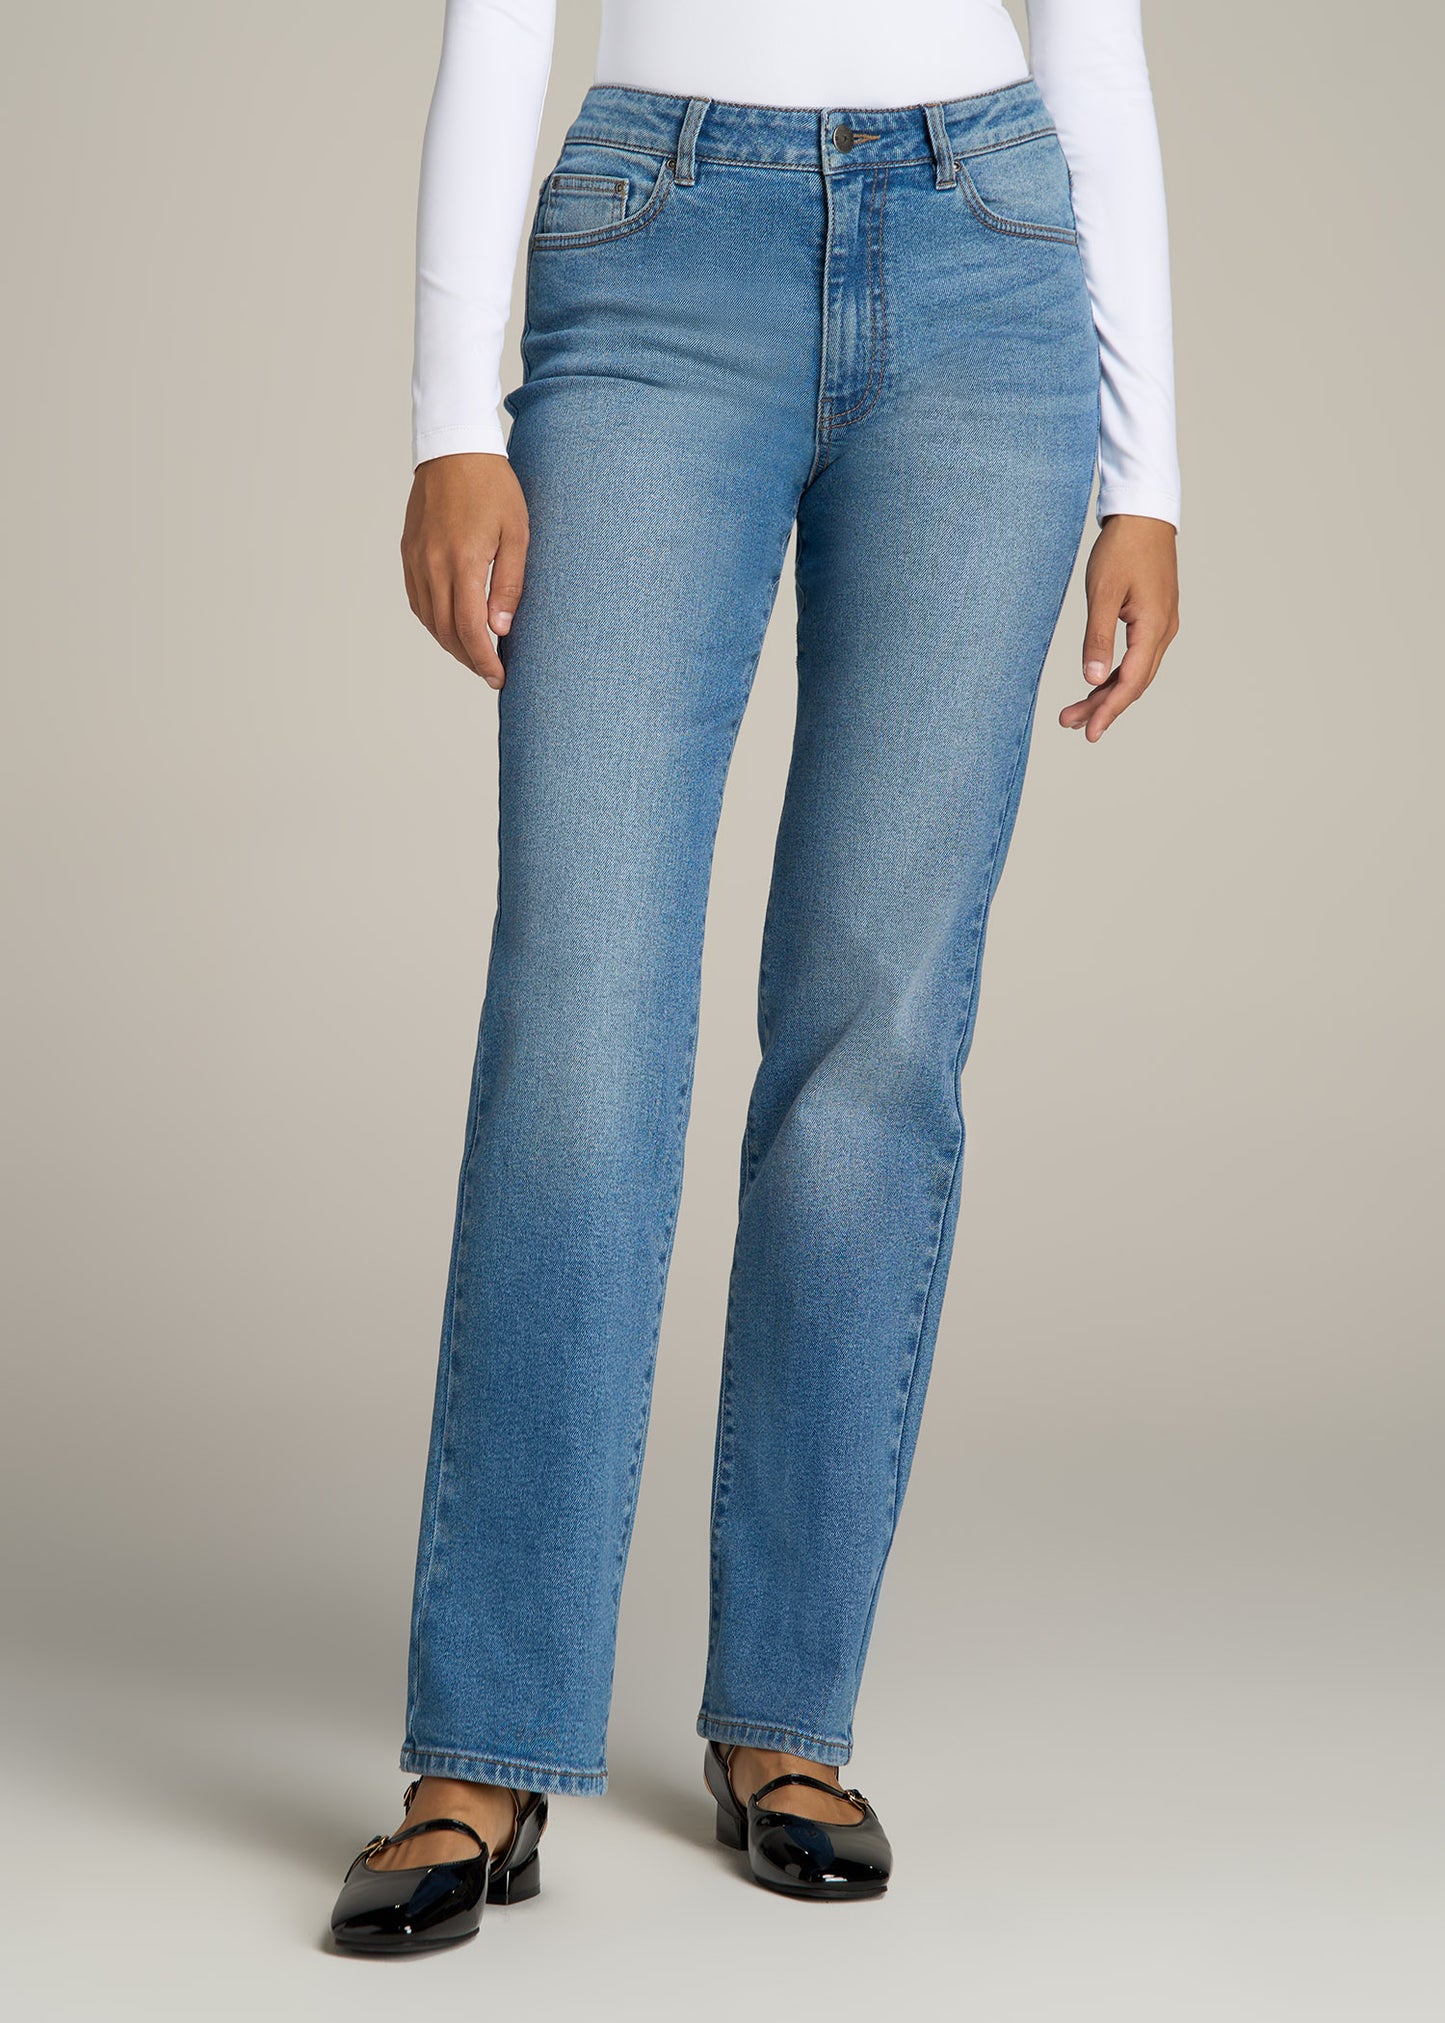 A tall woman wearing American Tall's Harper High Rise Straight Stretch Tall Women's Jeans in Colorado Blue.